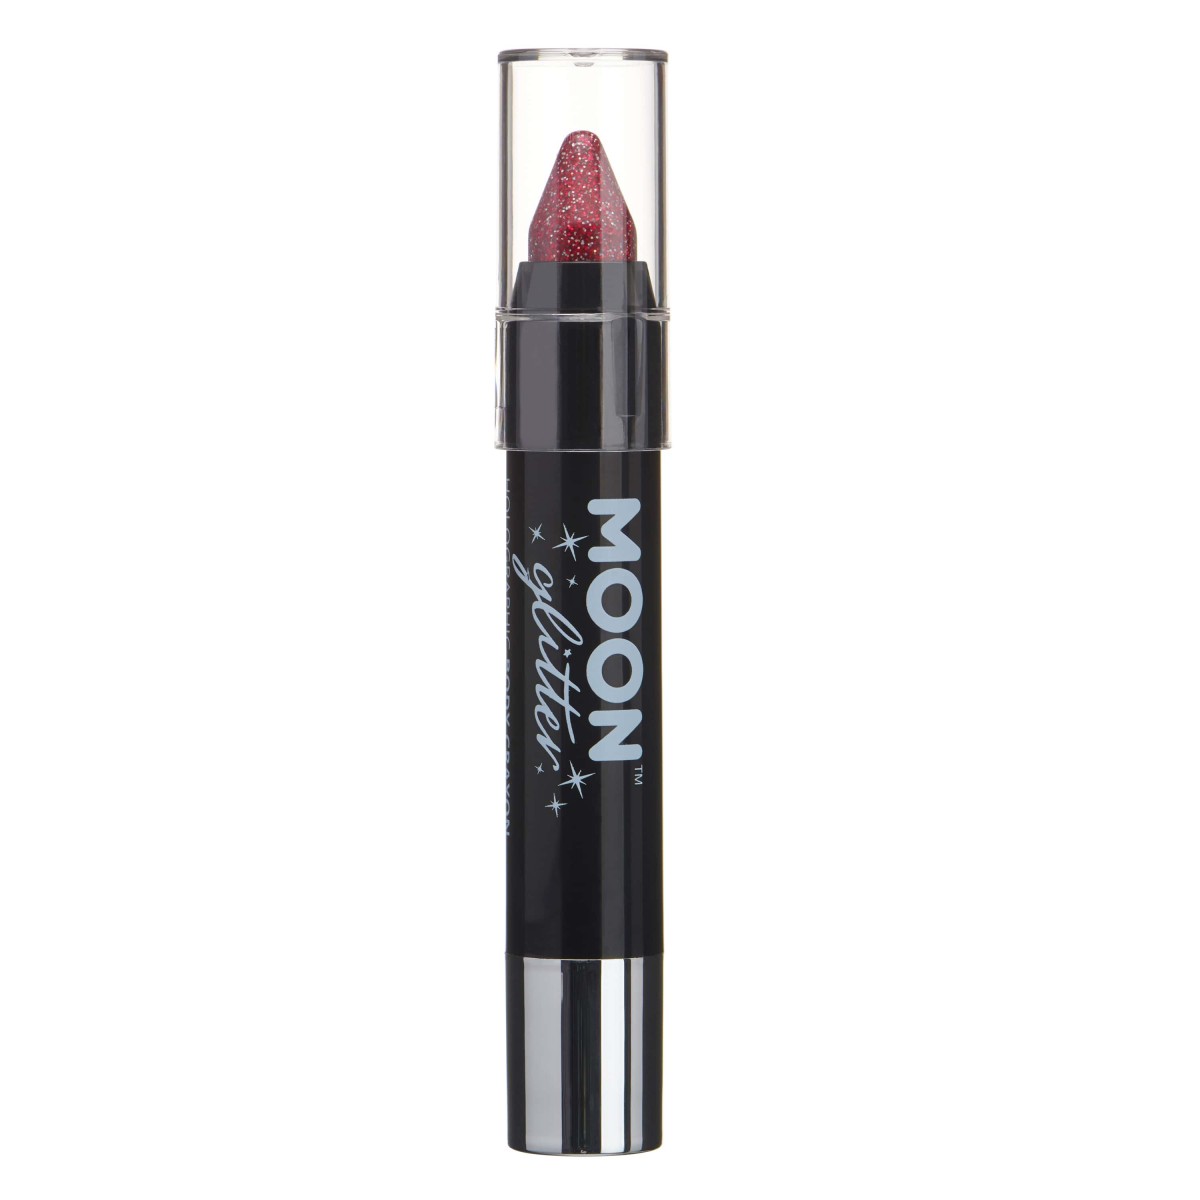 MOON CREATIONS G2 HOLOGRAPHIC GLITTER FACE & BODY CRAYON RED 3.2g